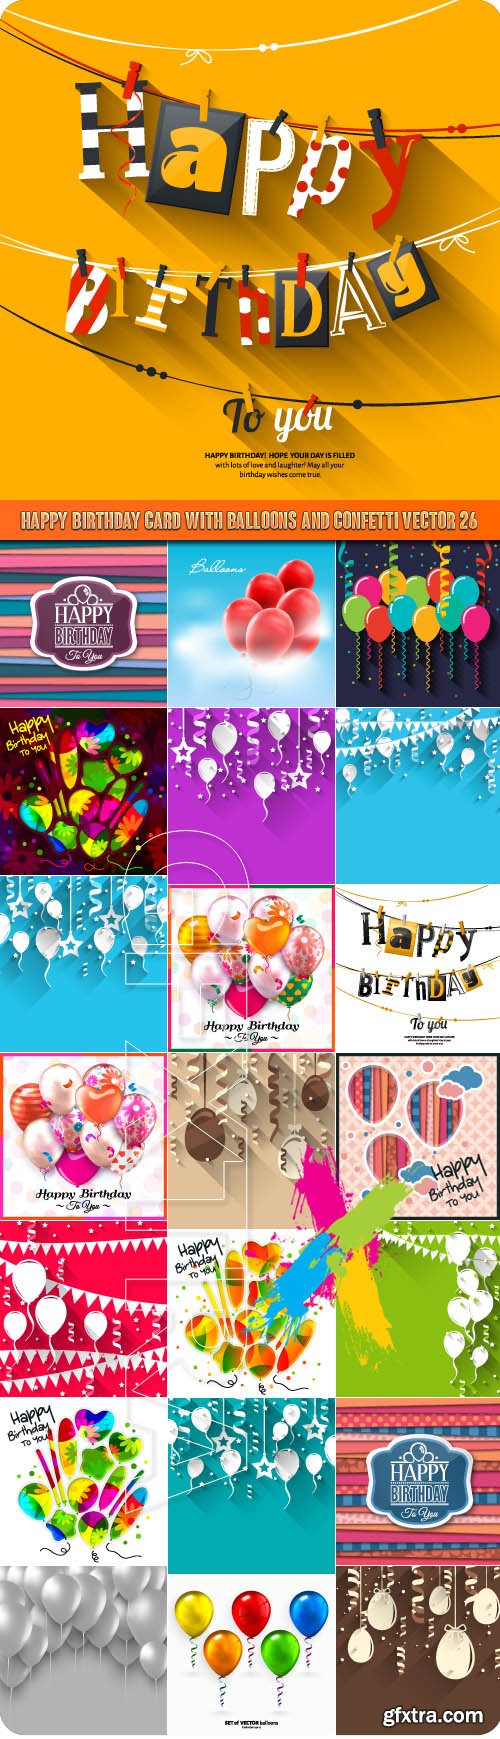 Happy Birthday card with balloons and confetti vector 26